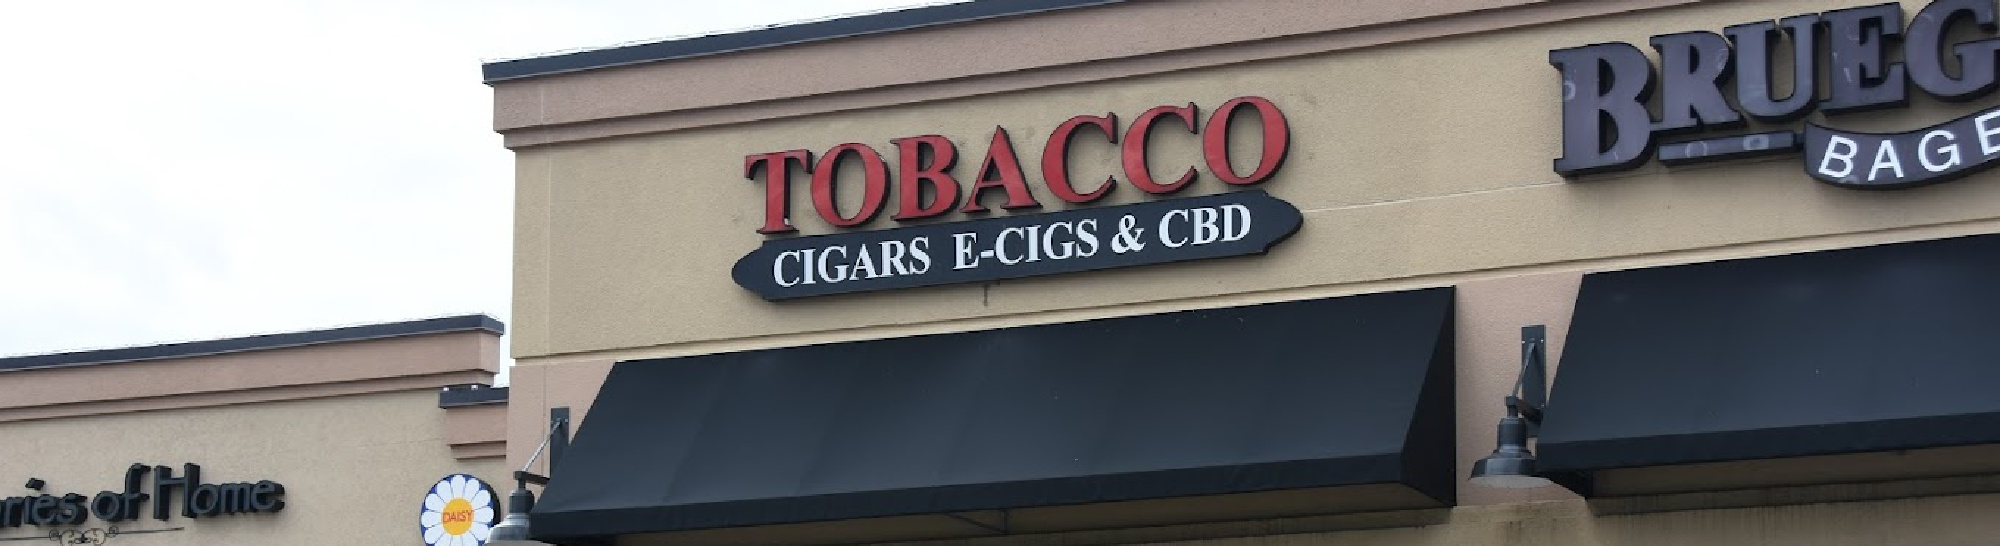 image of nean tobacco in mn